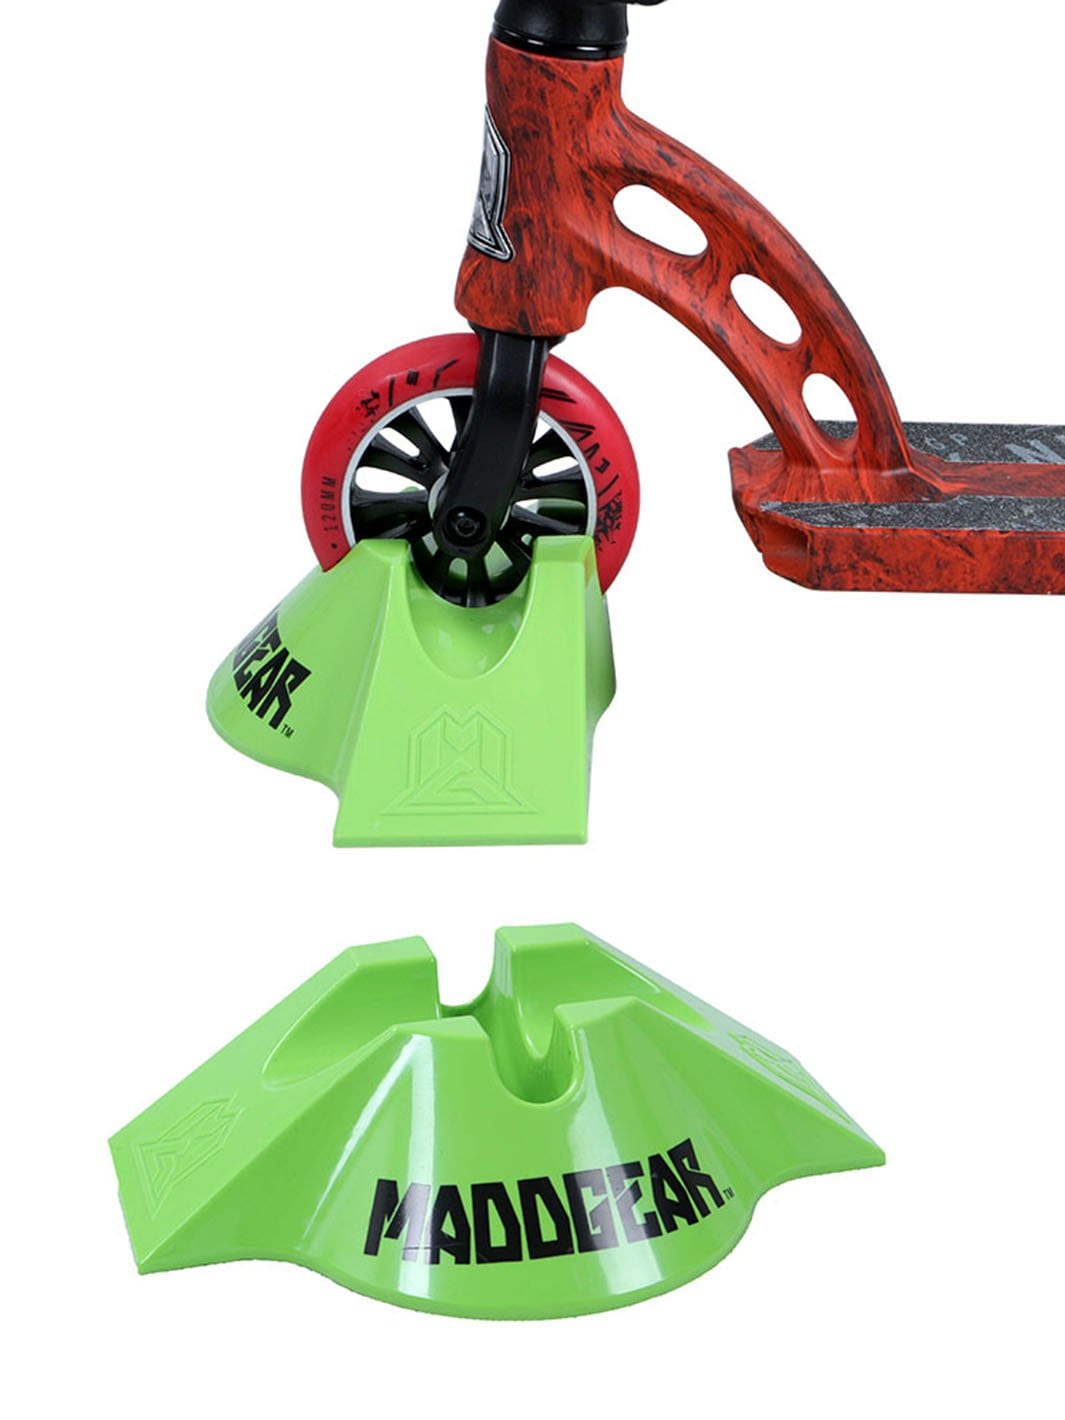 Madd Gear Pro Scooter Stand green best kick scoot rack